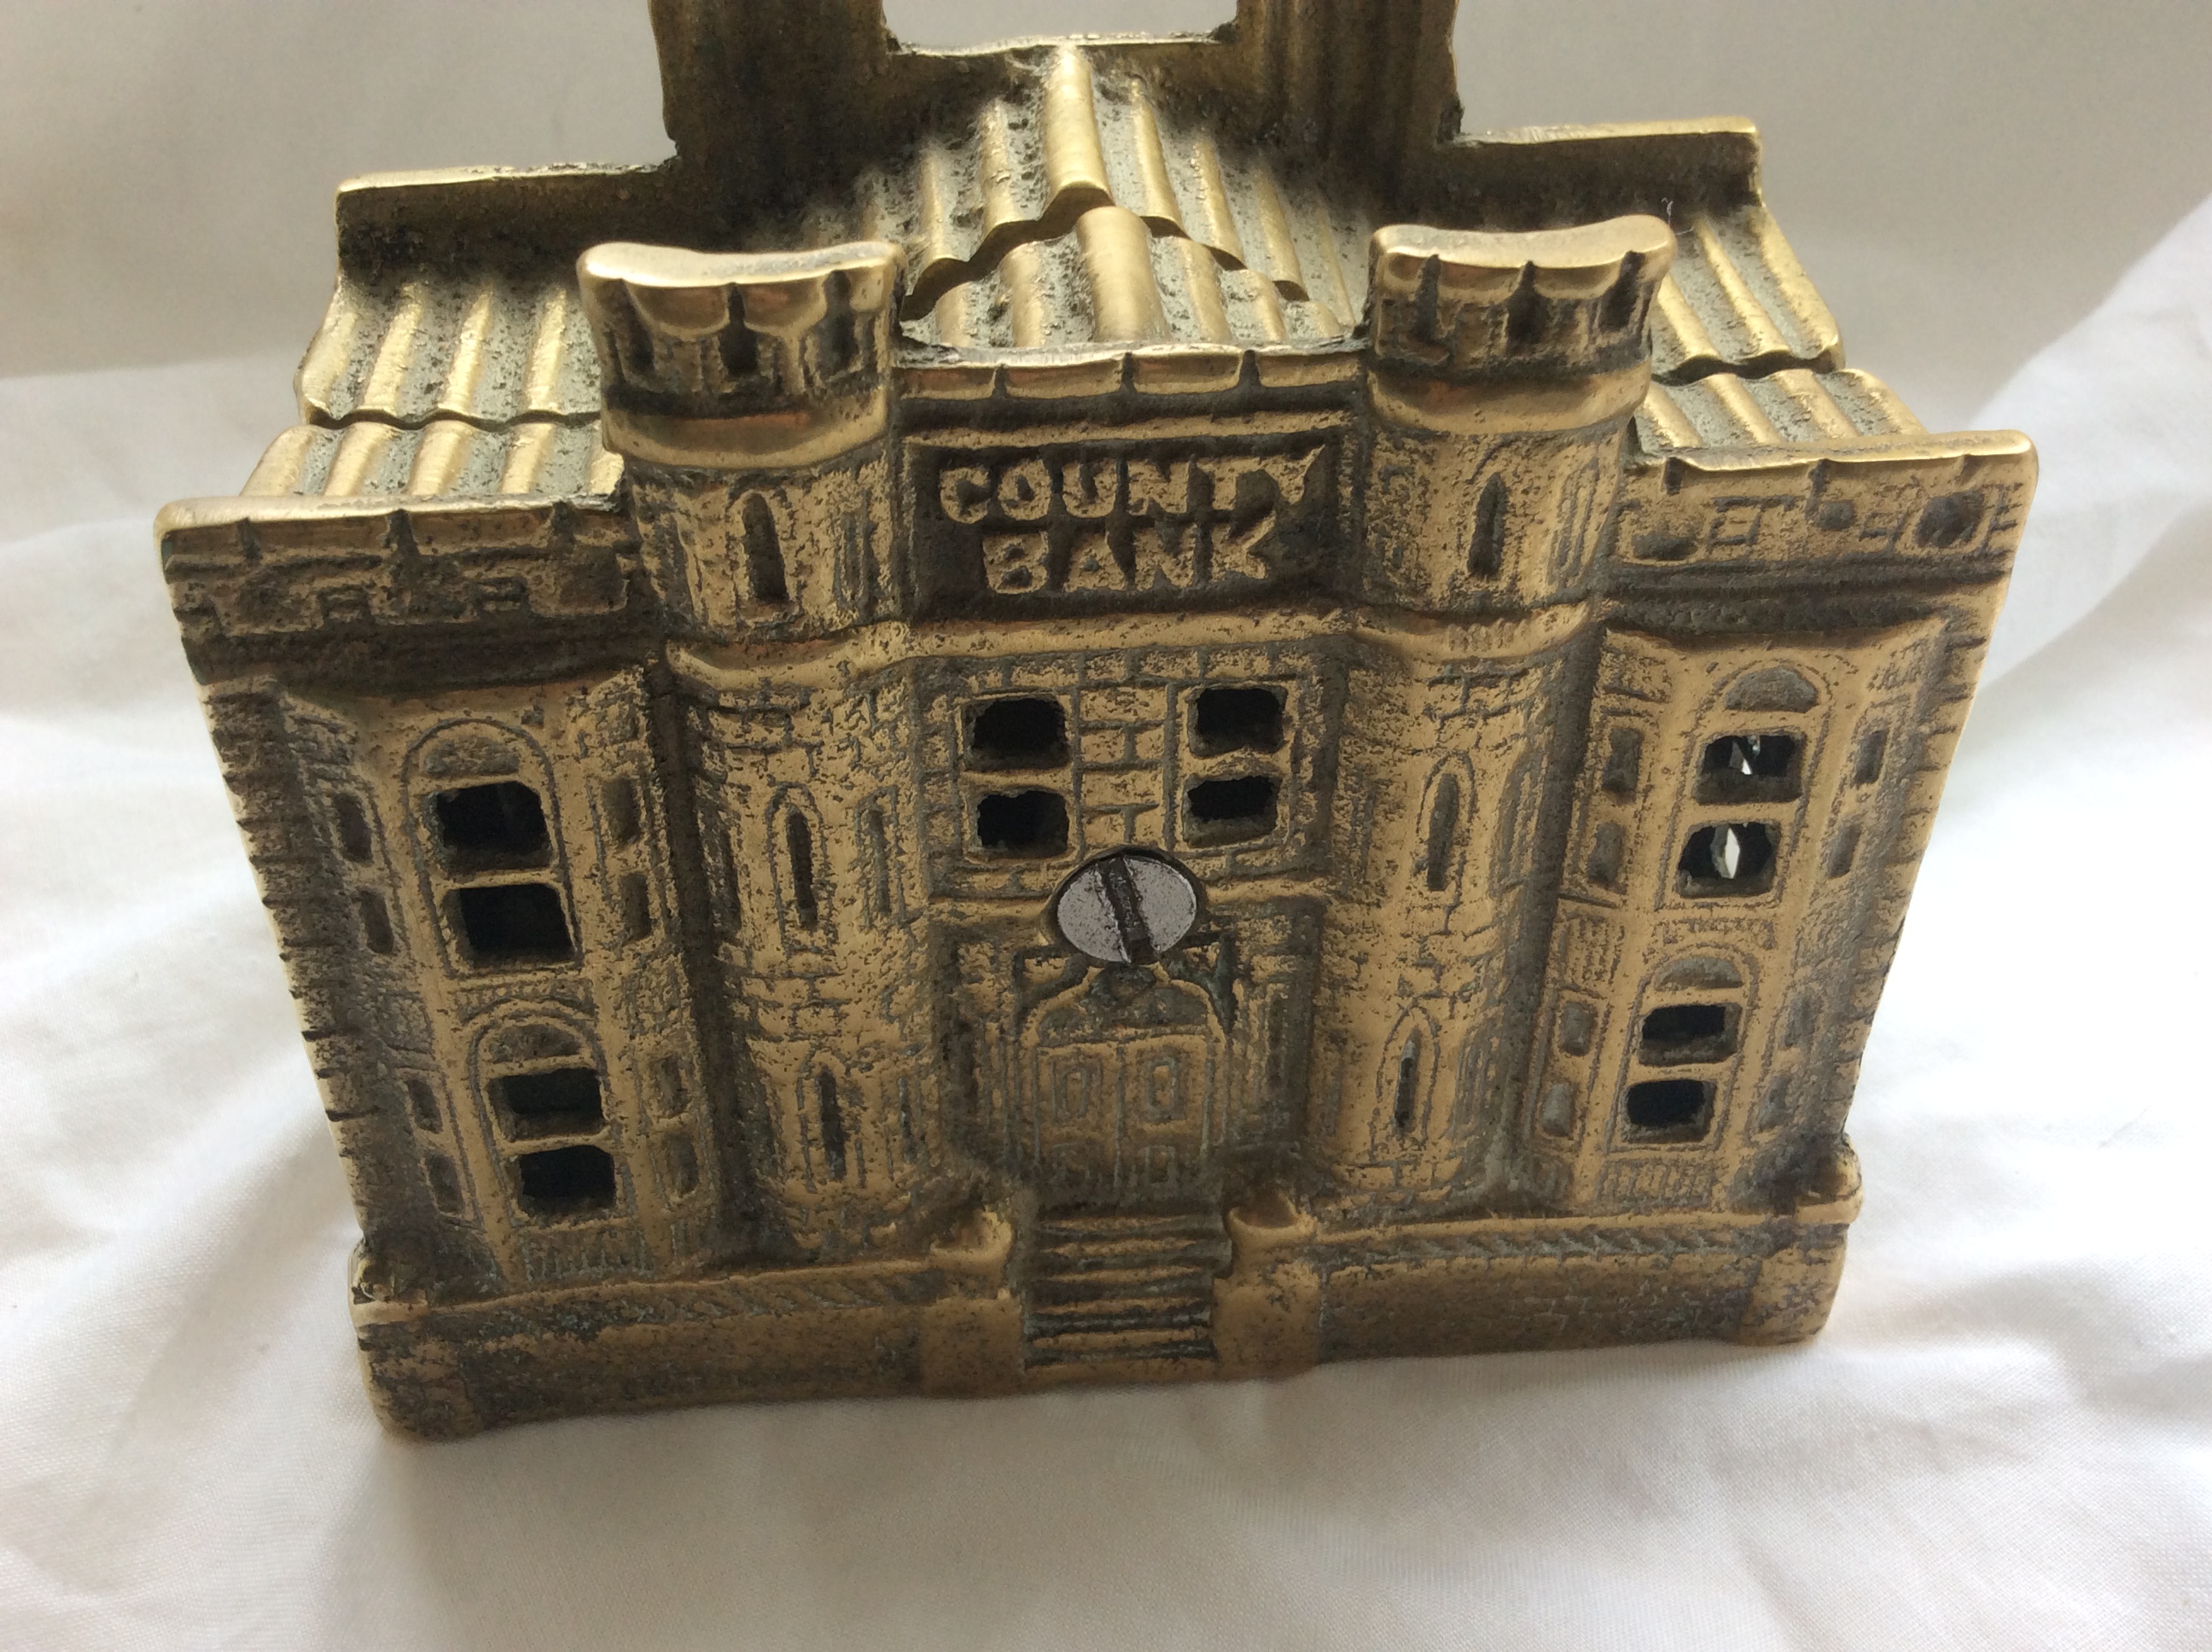 Antique Brass County Bank Money Box - Image 5 of 6